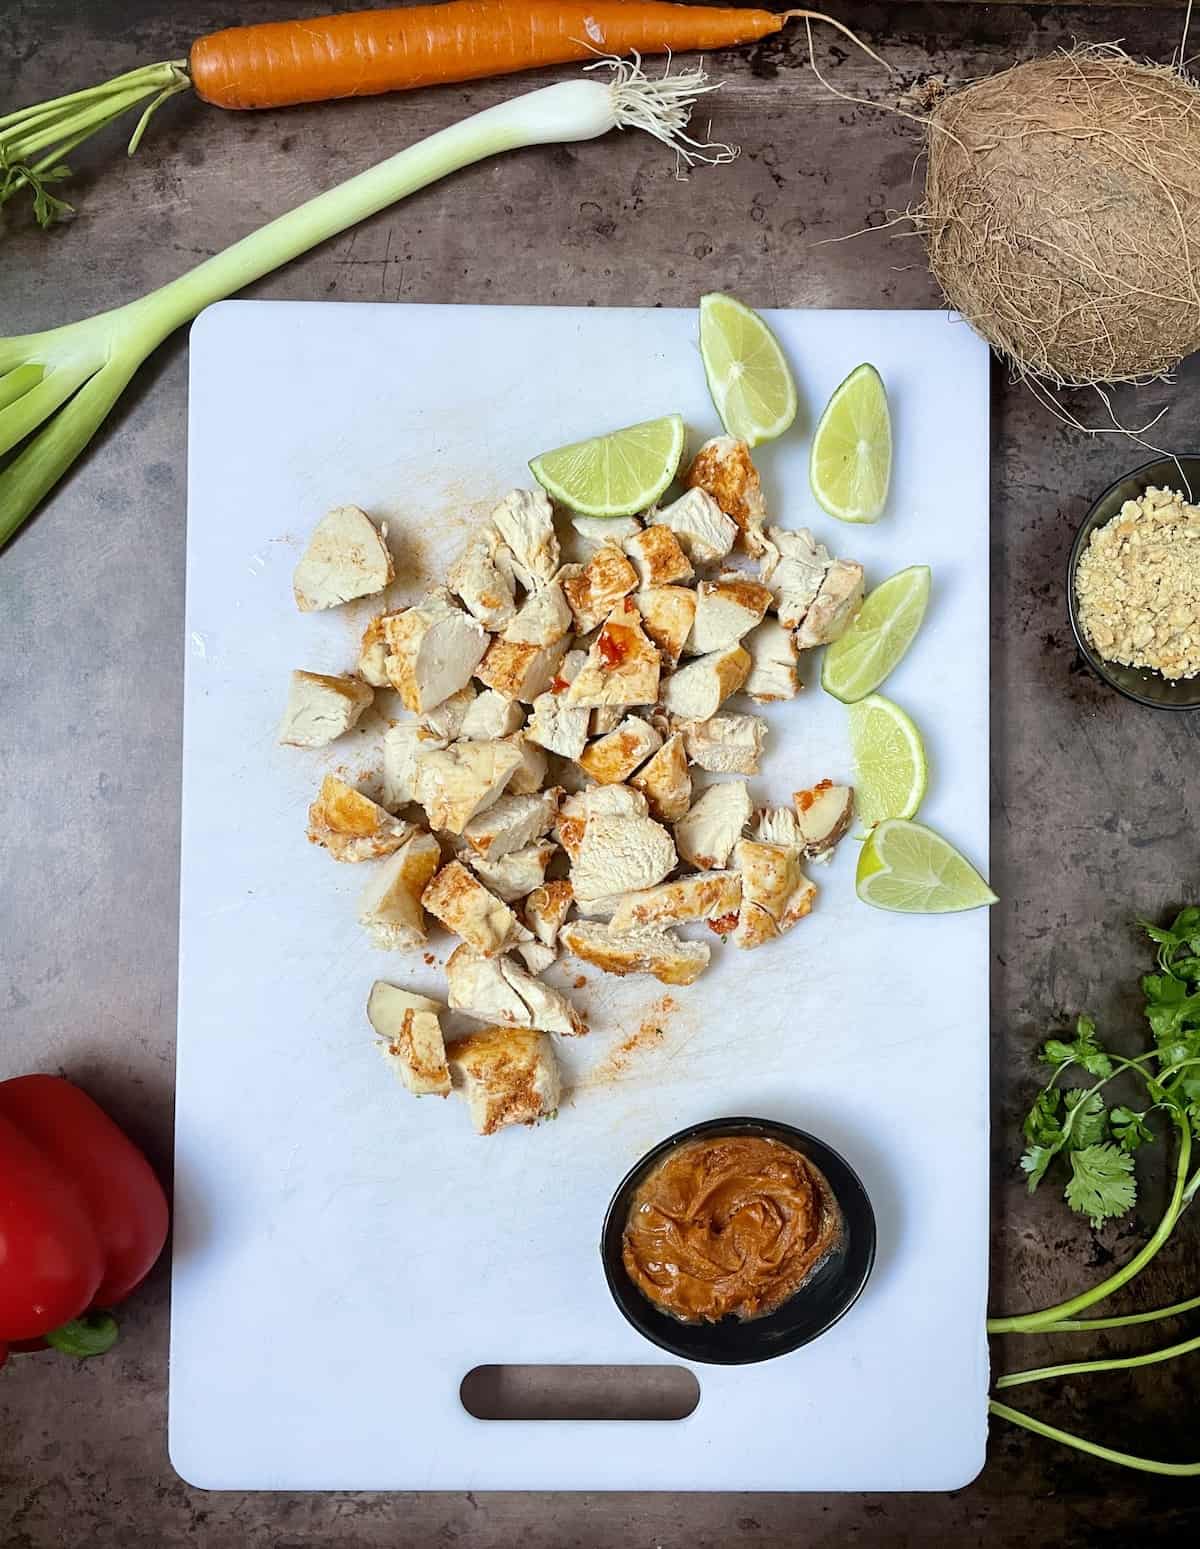 Cooked chicken cut into bite-sized pieces on a white cutting board with peanut sauce.